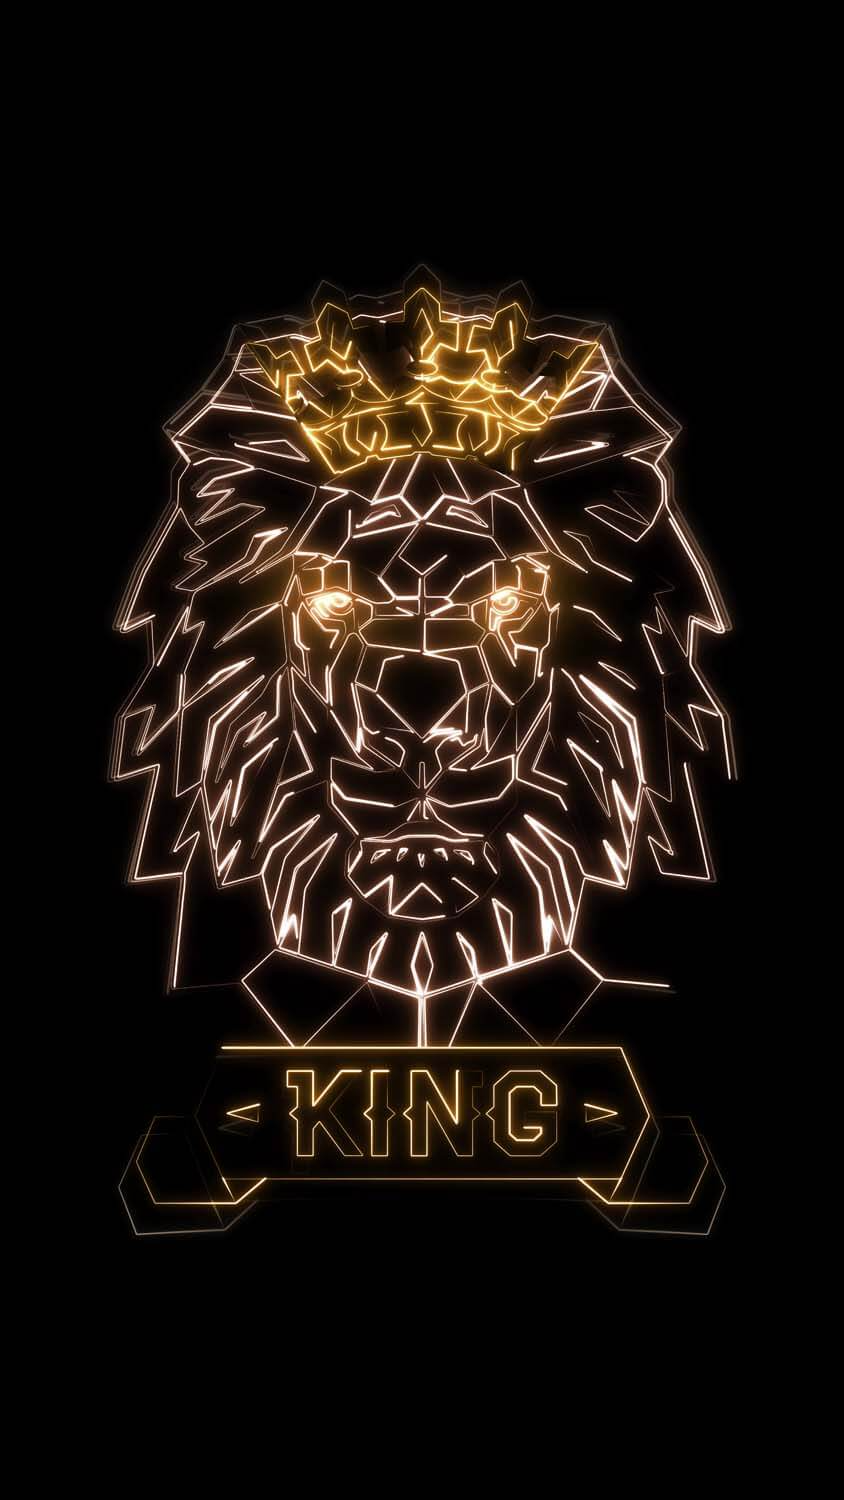 The King iPhone Wallpaper  iPhone Wallpapers